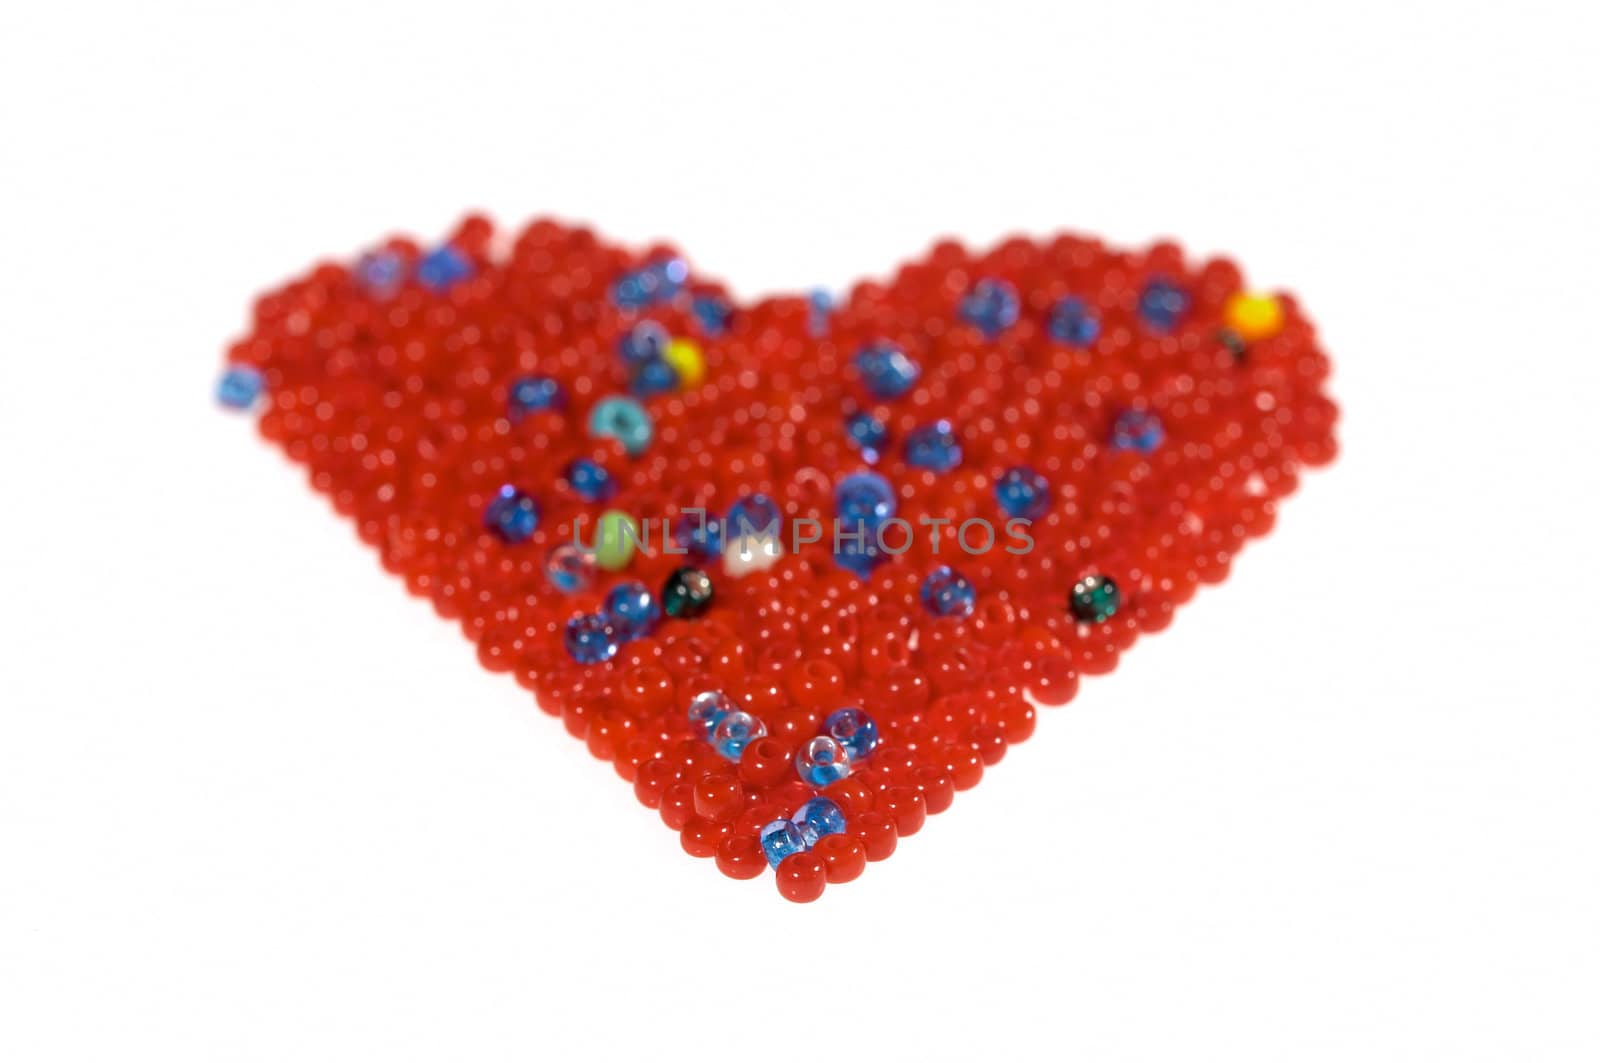 Heart made of red glass beads